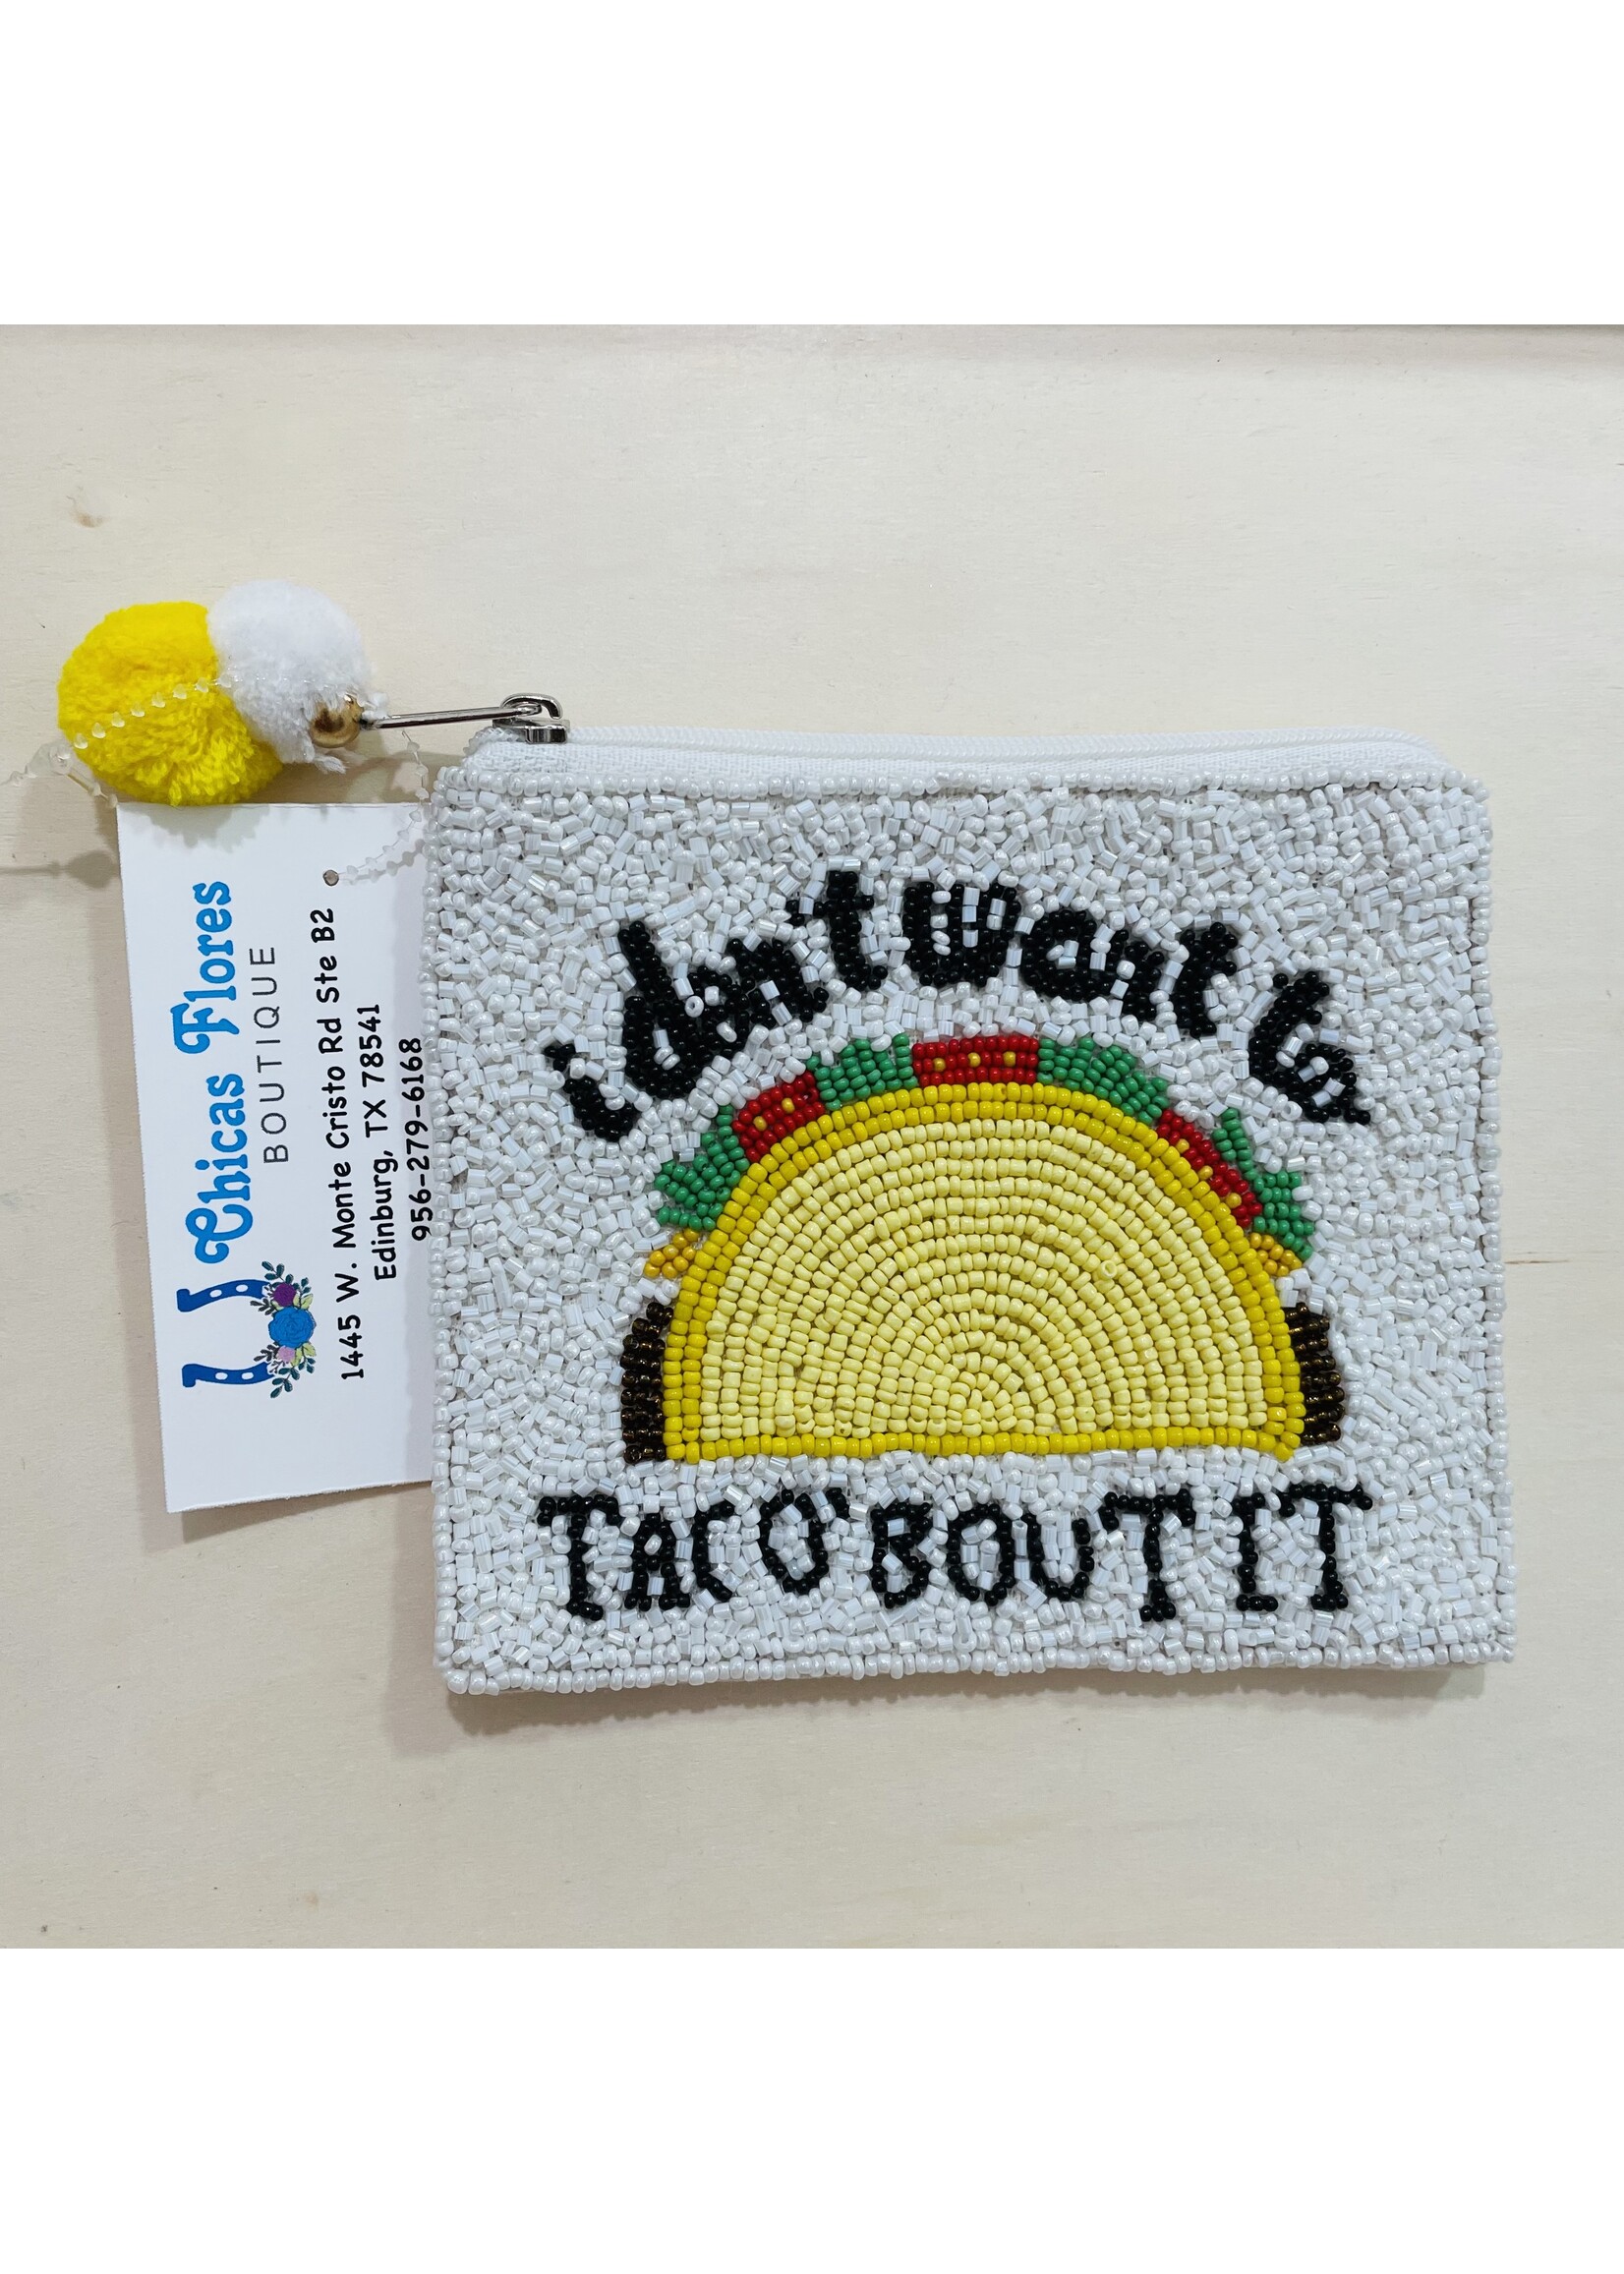 I don't want to Taco bout it Pouch